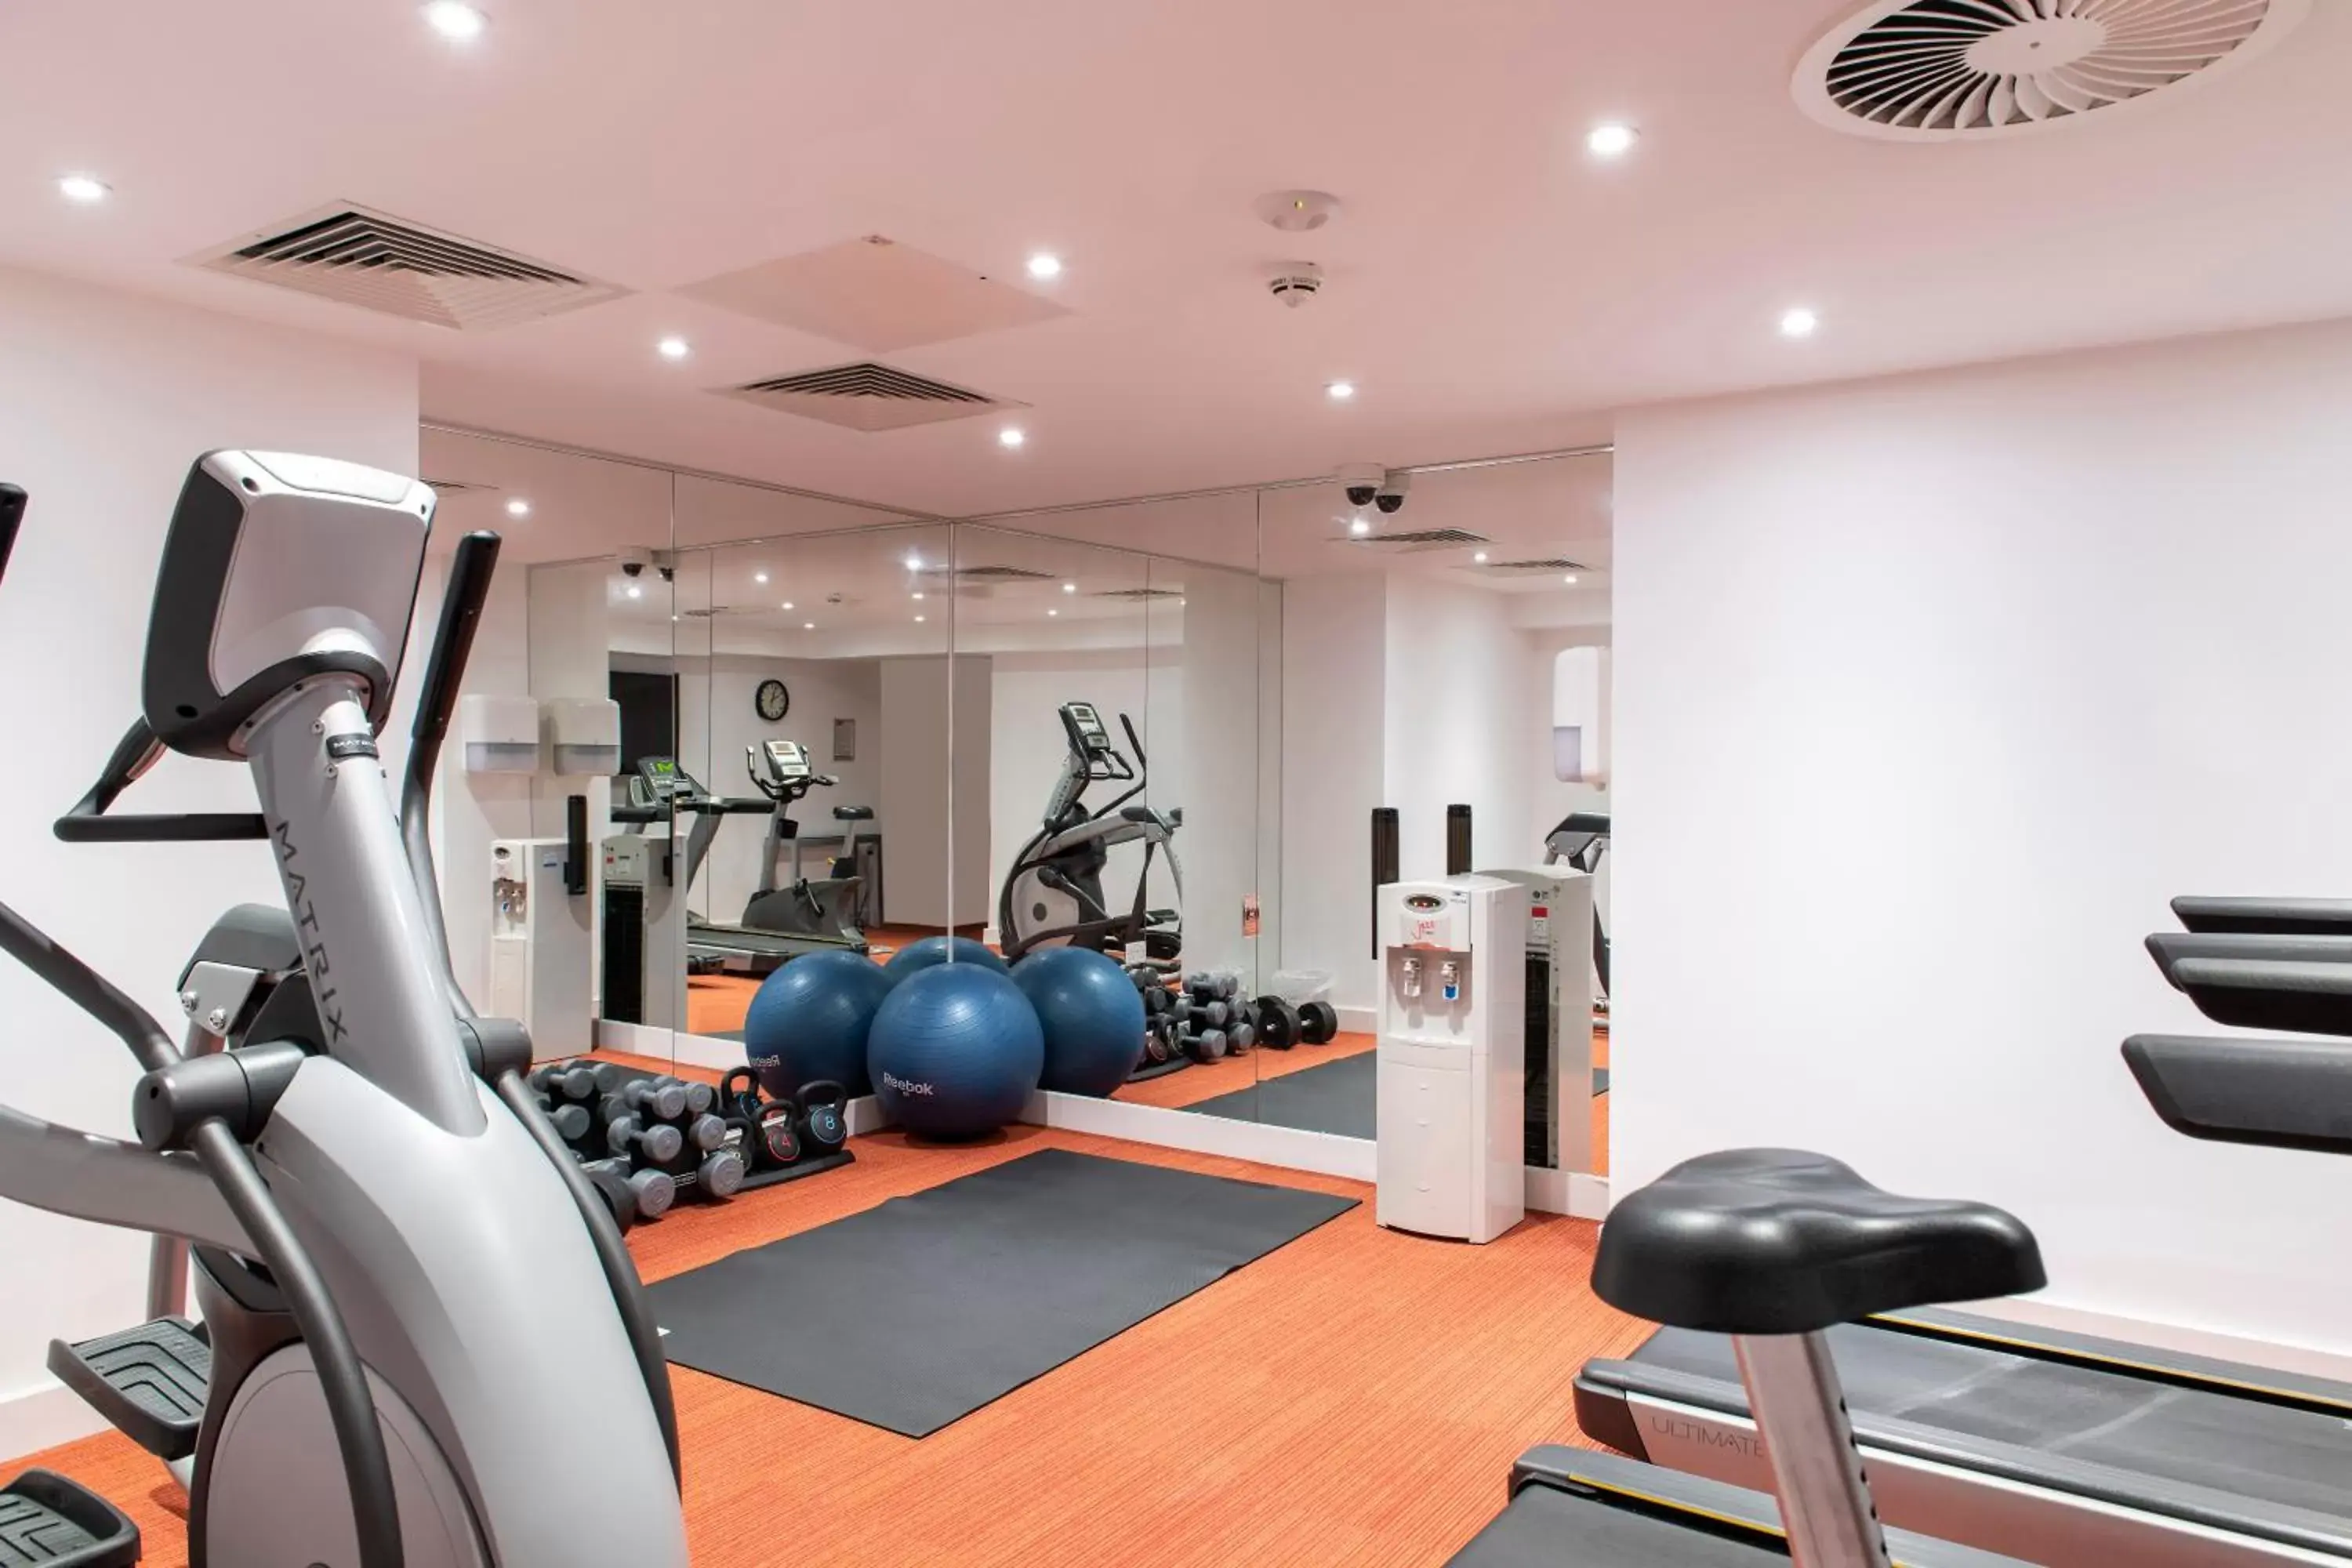 Fitness centre/facilities, Fitness Center/Facilities in Cove Minshull Street